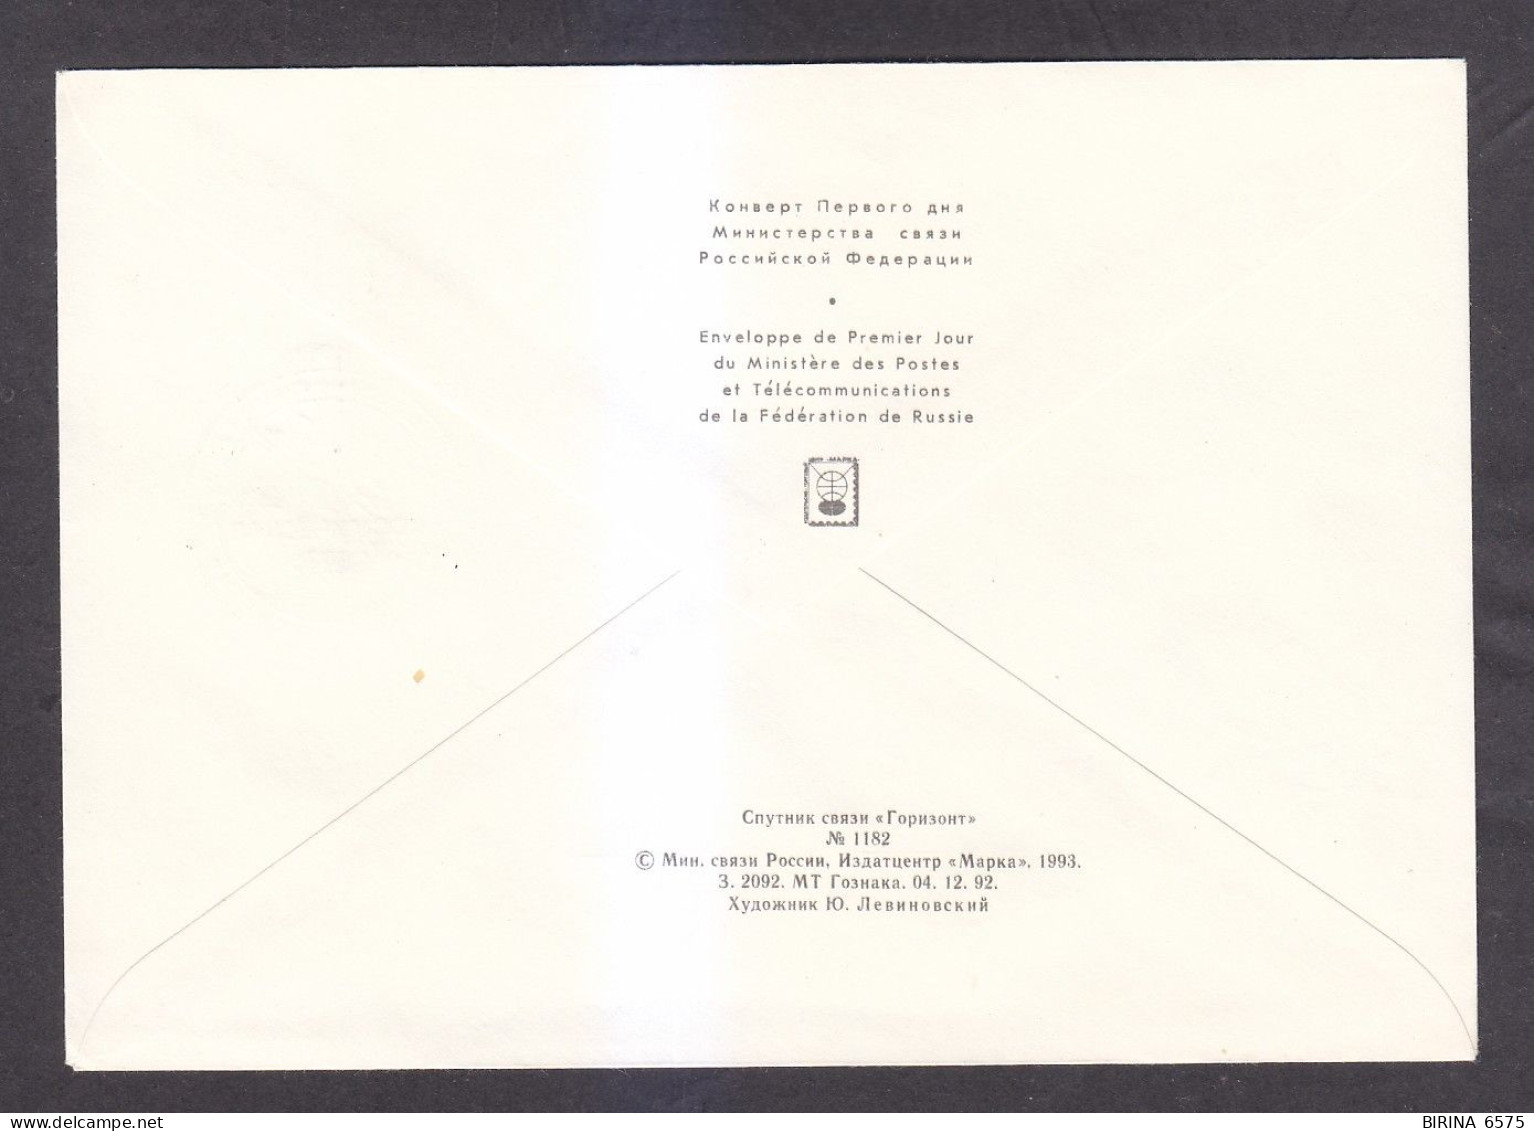 Envelope. Russia. SPACE COMMUNICATION. - 7-5 - Lettres & Documents